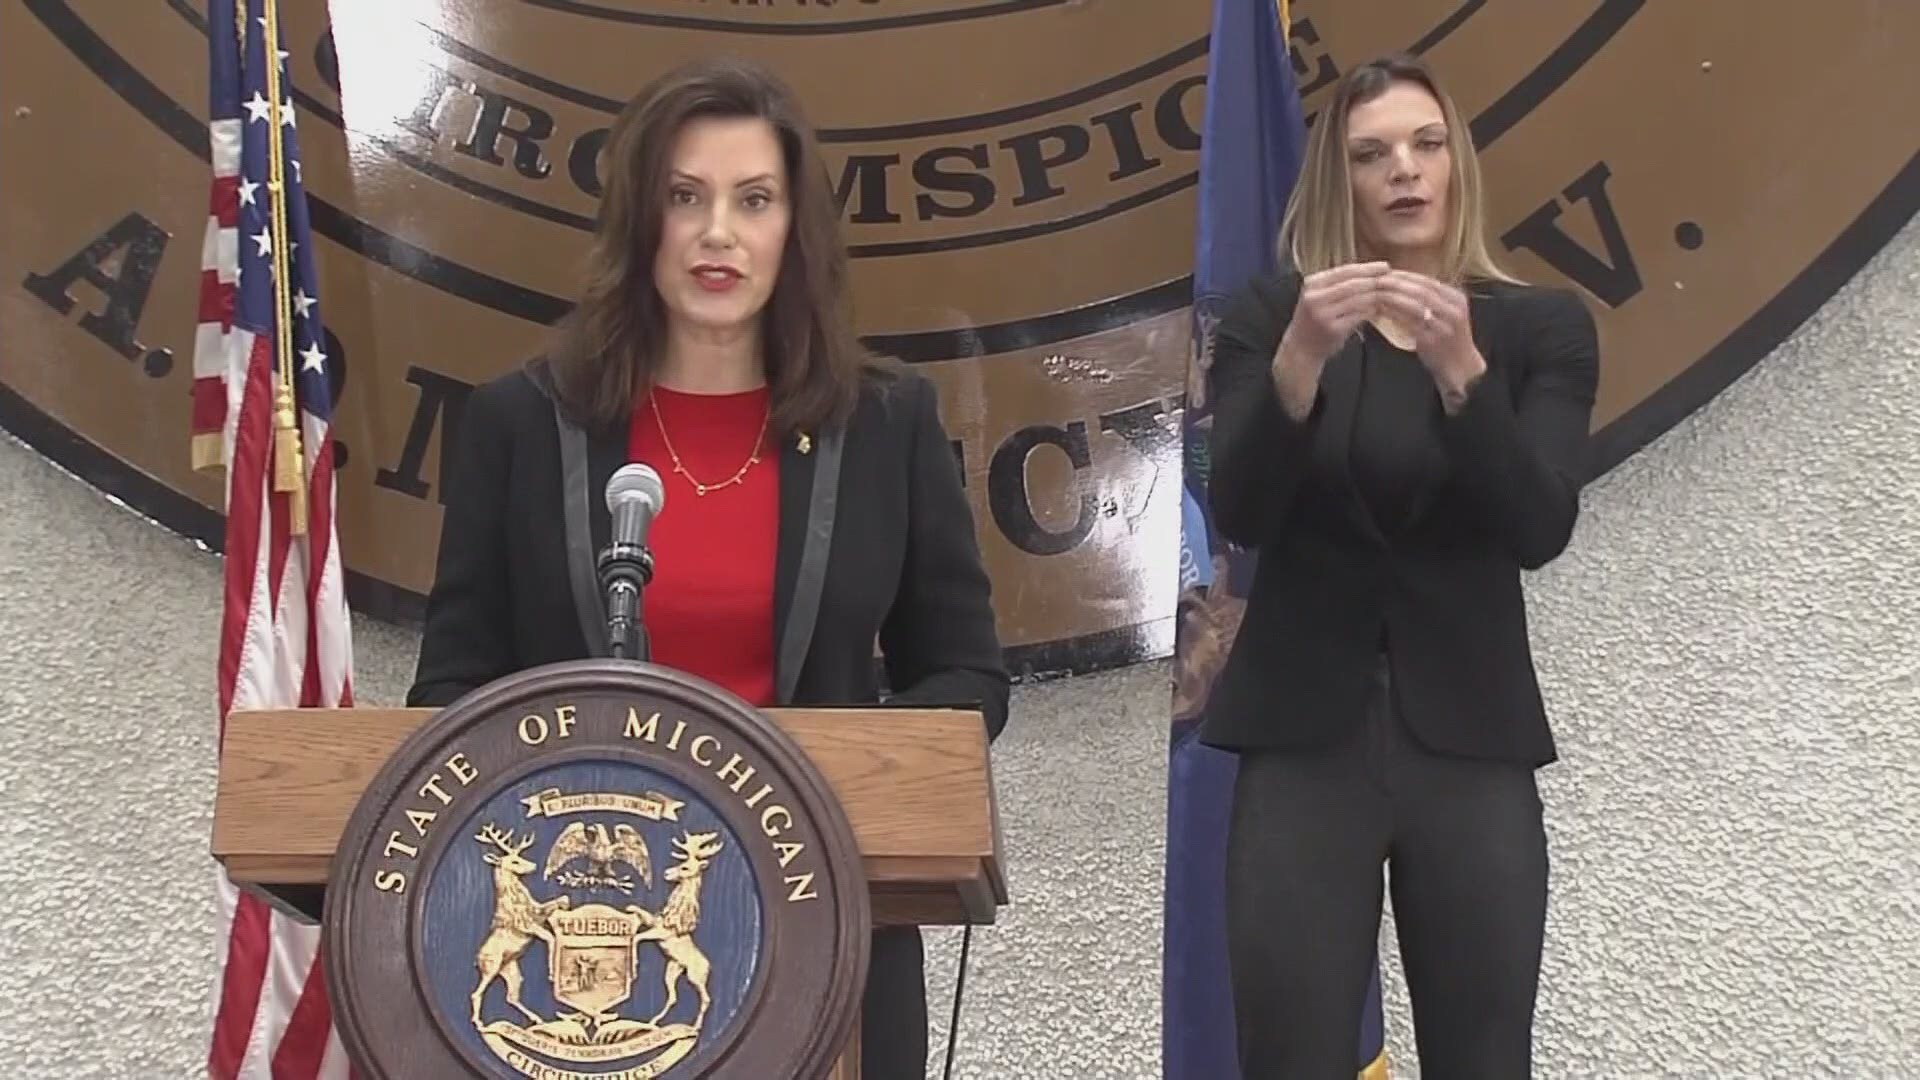 Hundreds of thousands of Michiganders could be eligible to have their records expunged now that Whitmer has signed the bipartisan bills.